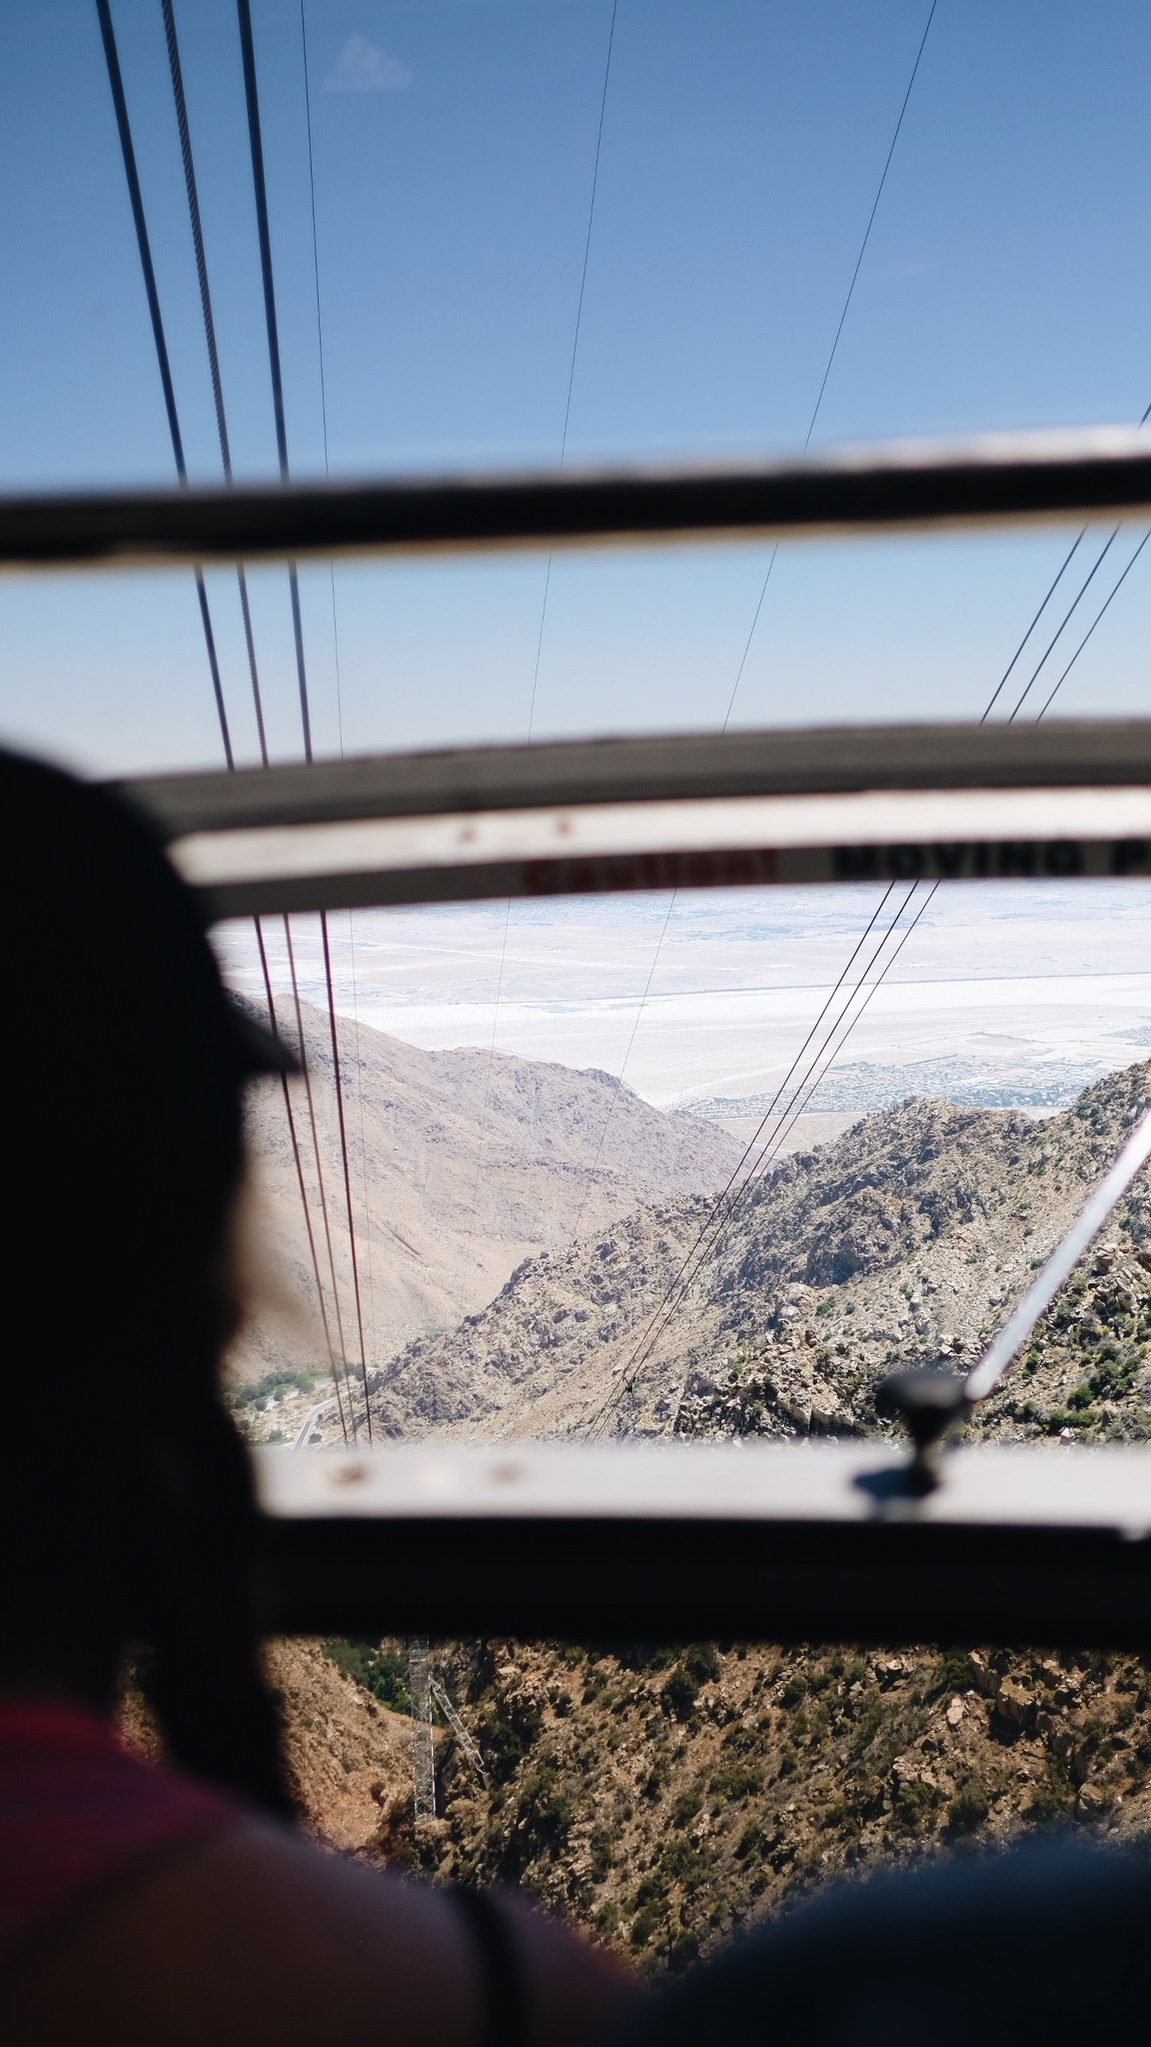 palm springs, aerial tramway, california, san jacinto creek, chino canyon, coachella valley, mountains, love, mother daughter, female, travel, adventure, explore